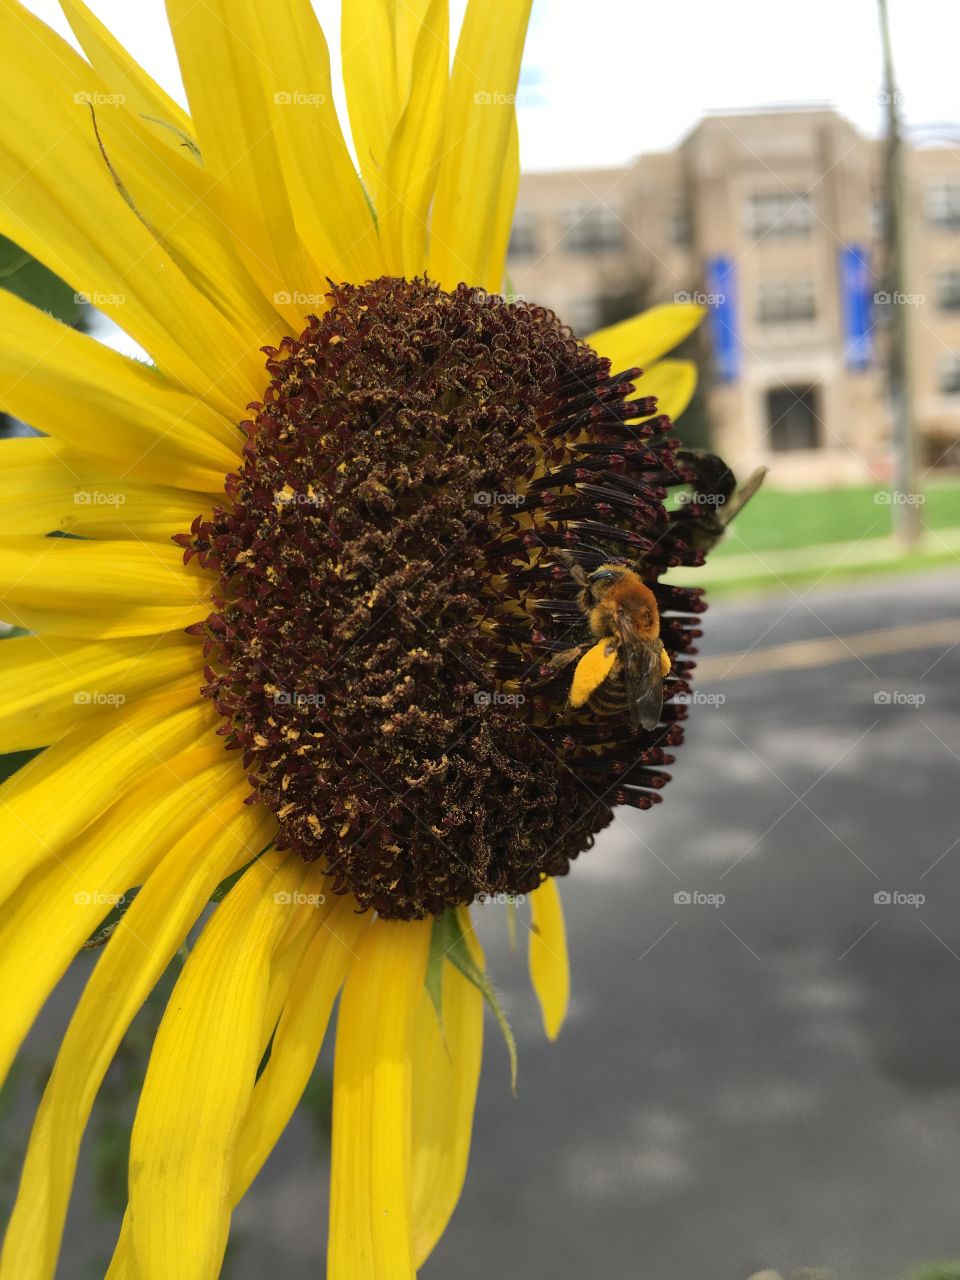 Two bees on sunflower